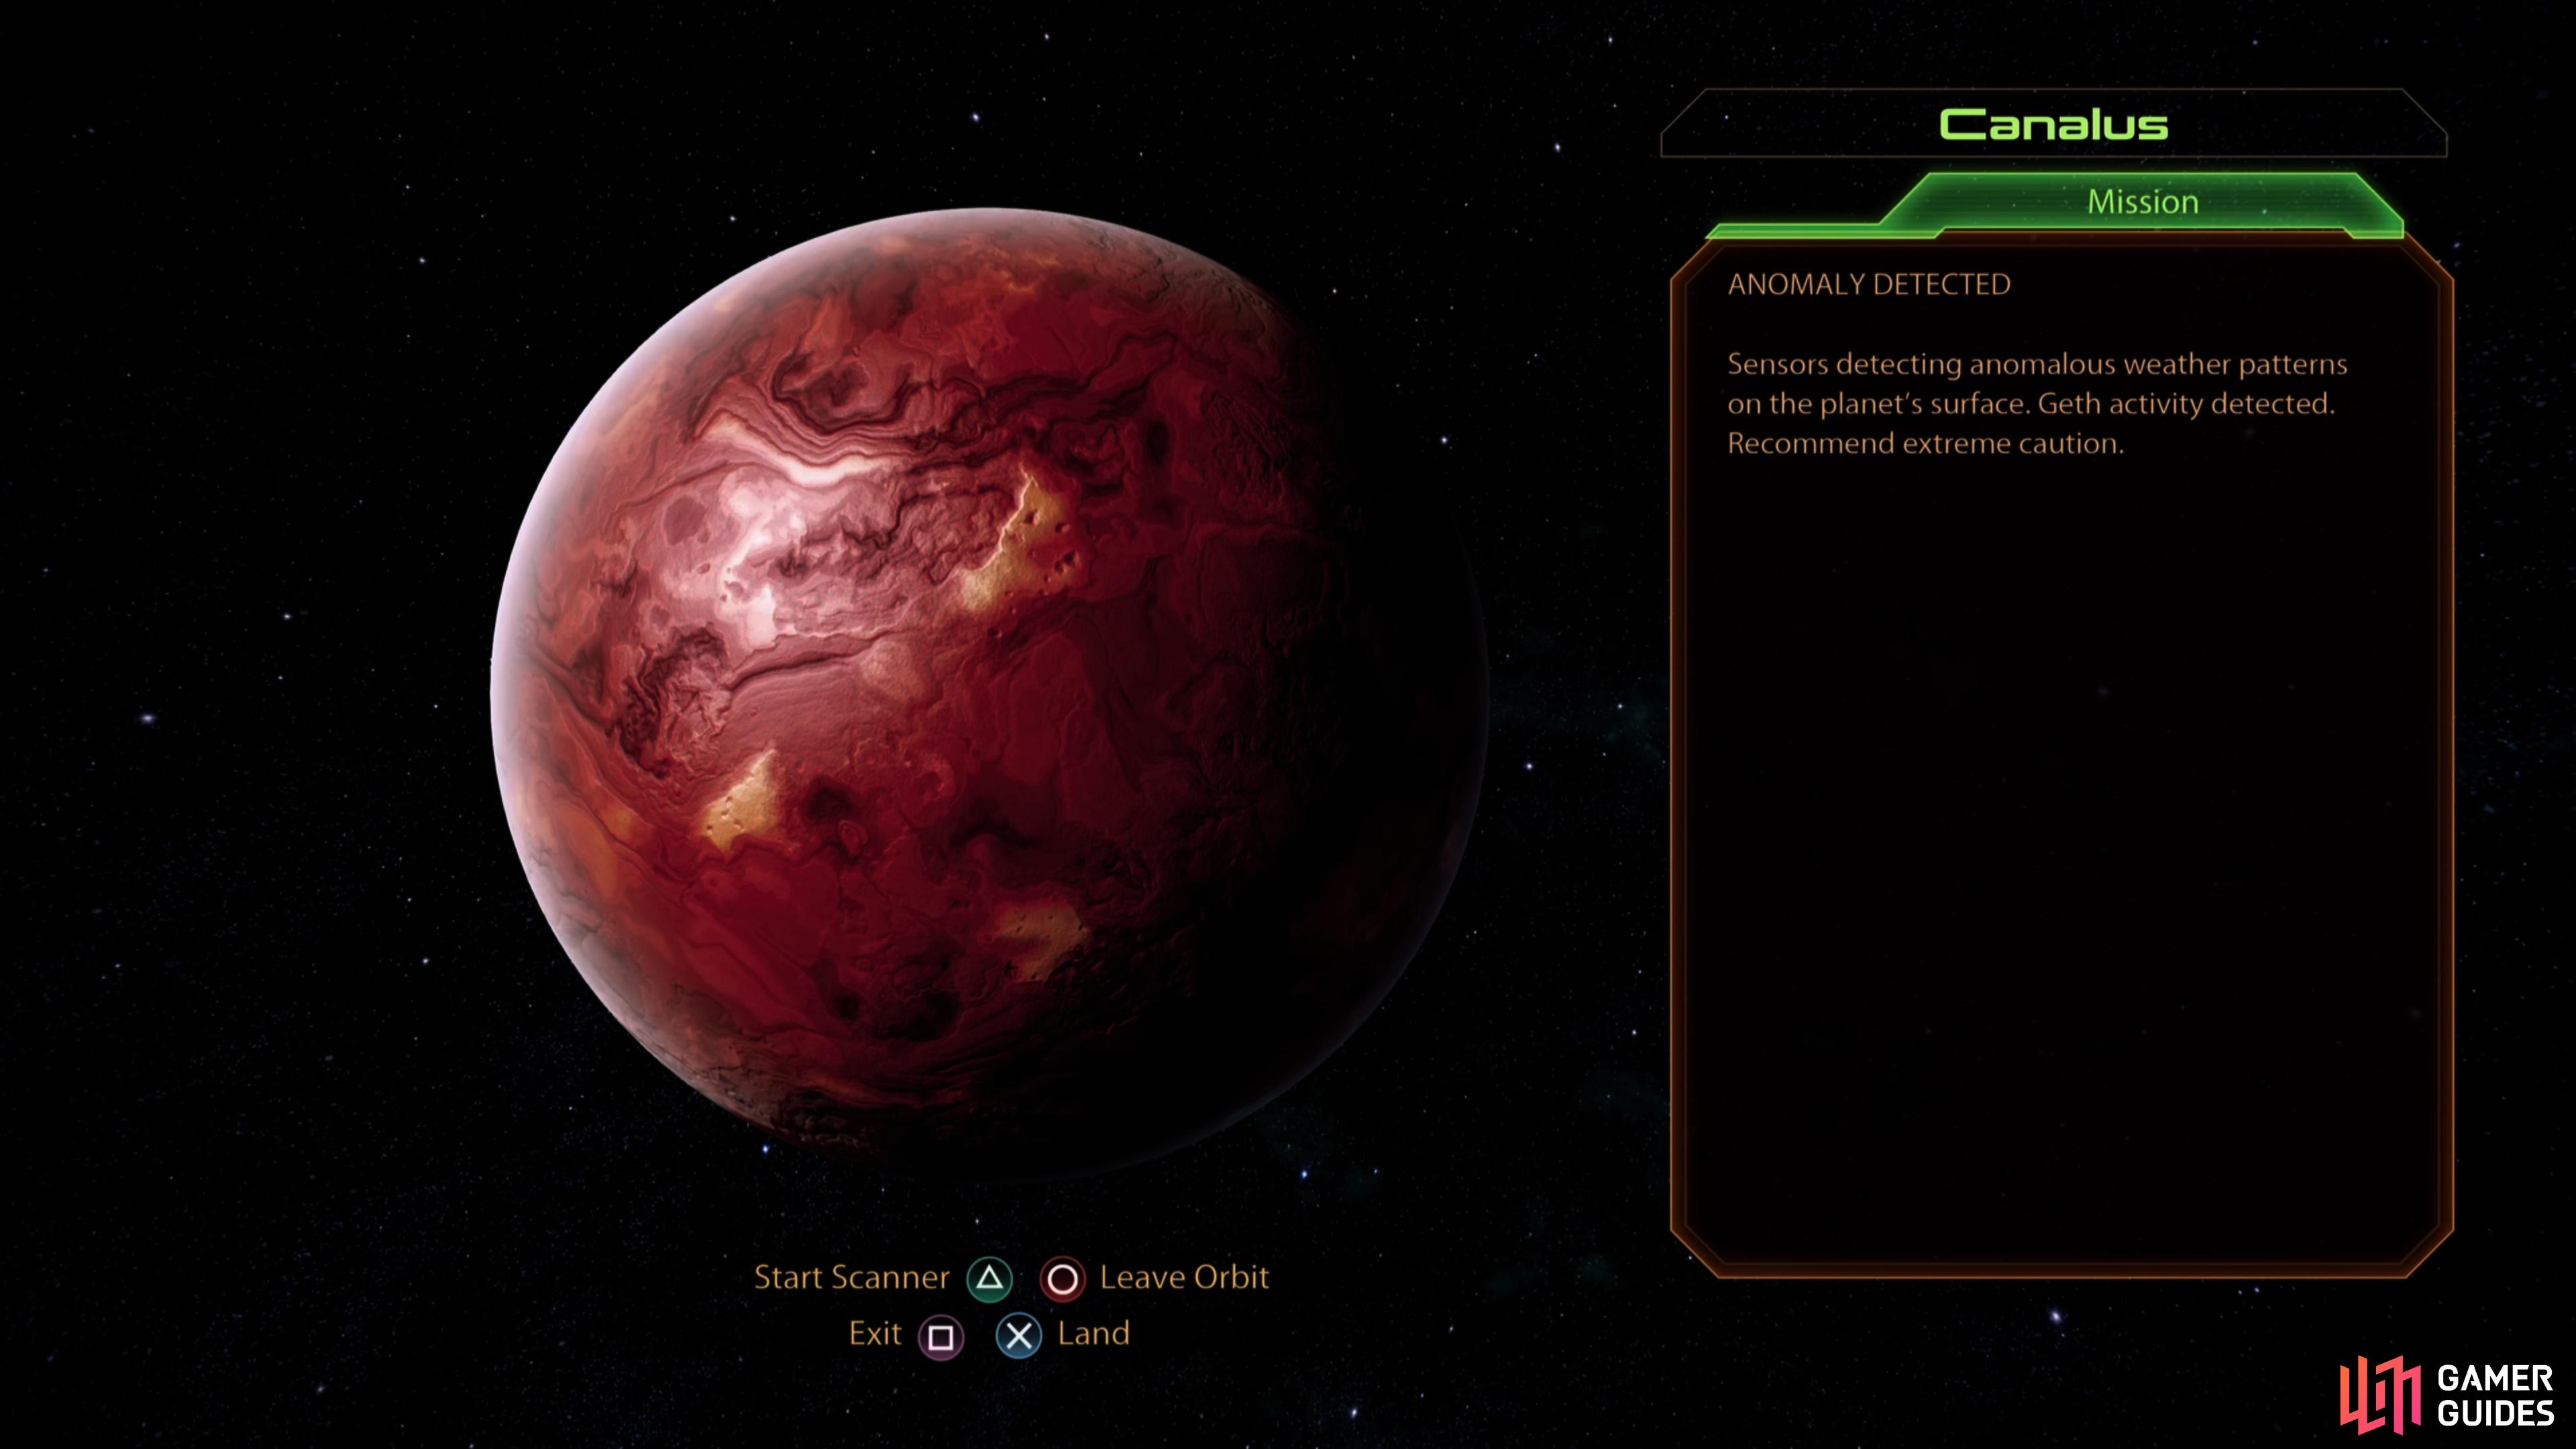 The assignment “Anomalous Weather Detected” takes place on Canalus.